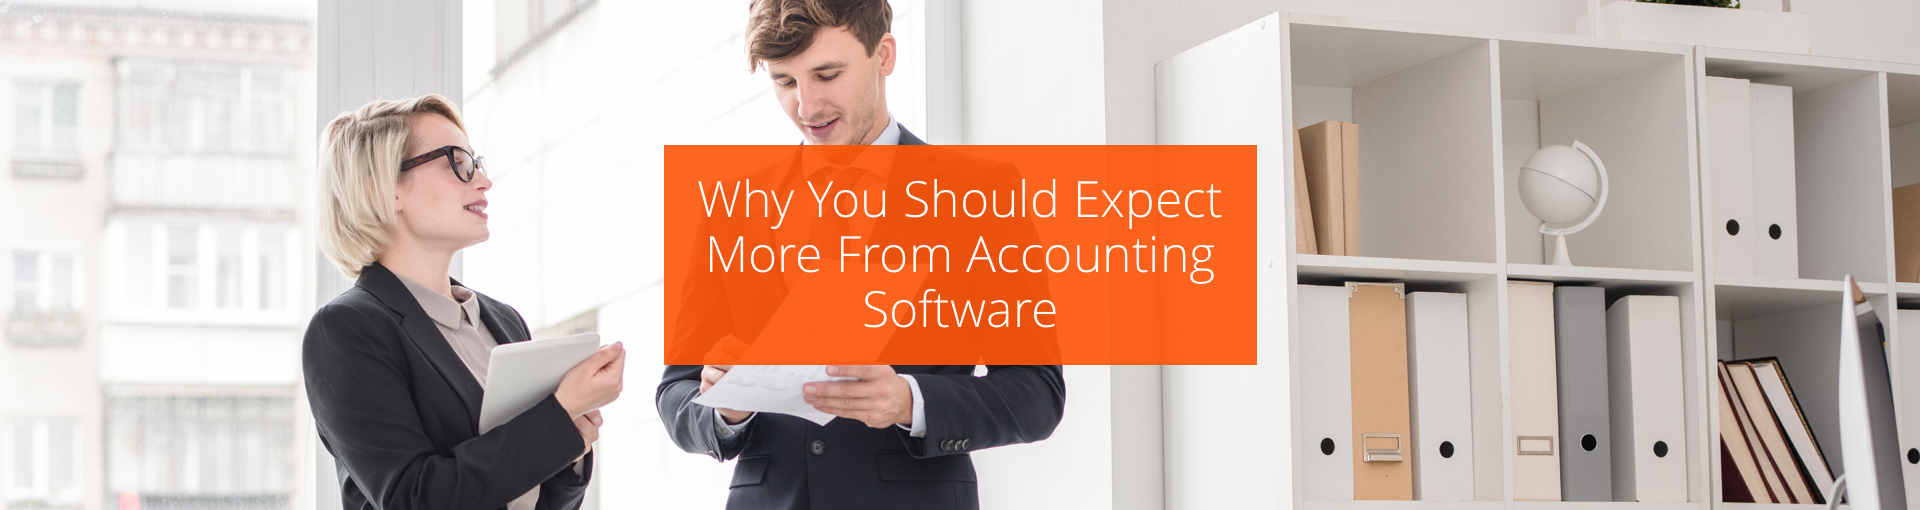 Why You Should Expect More From Accounting Software